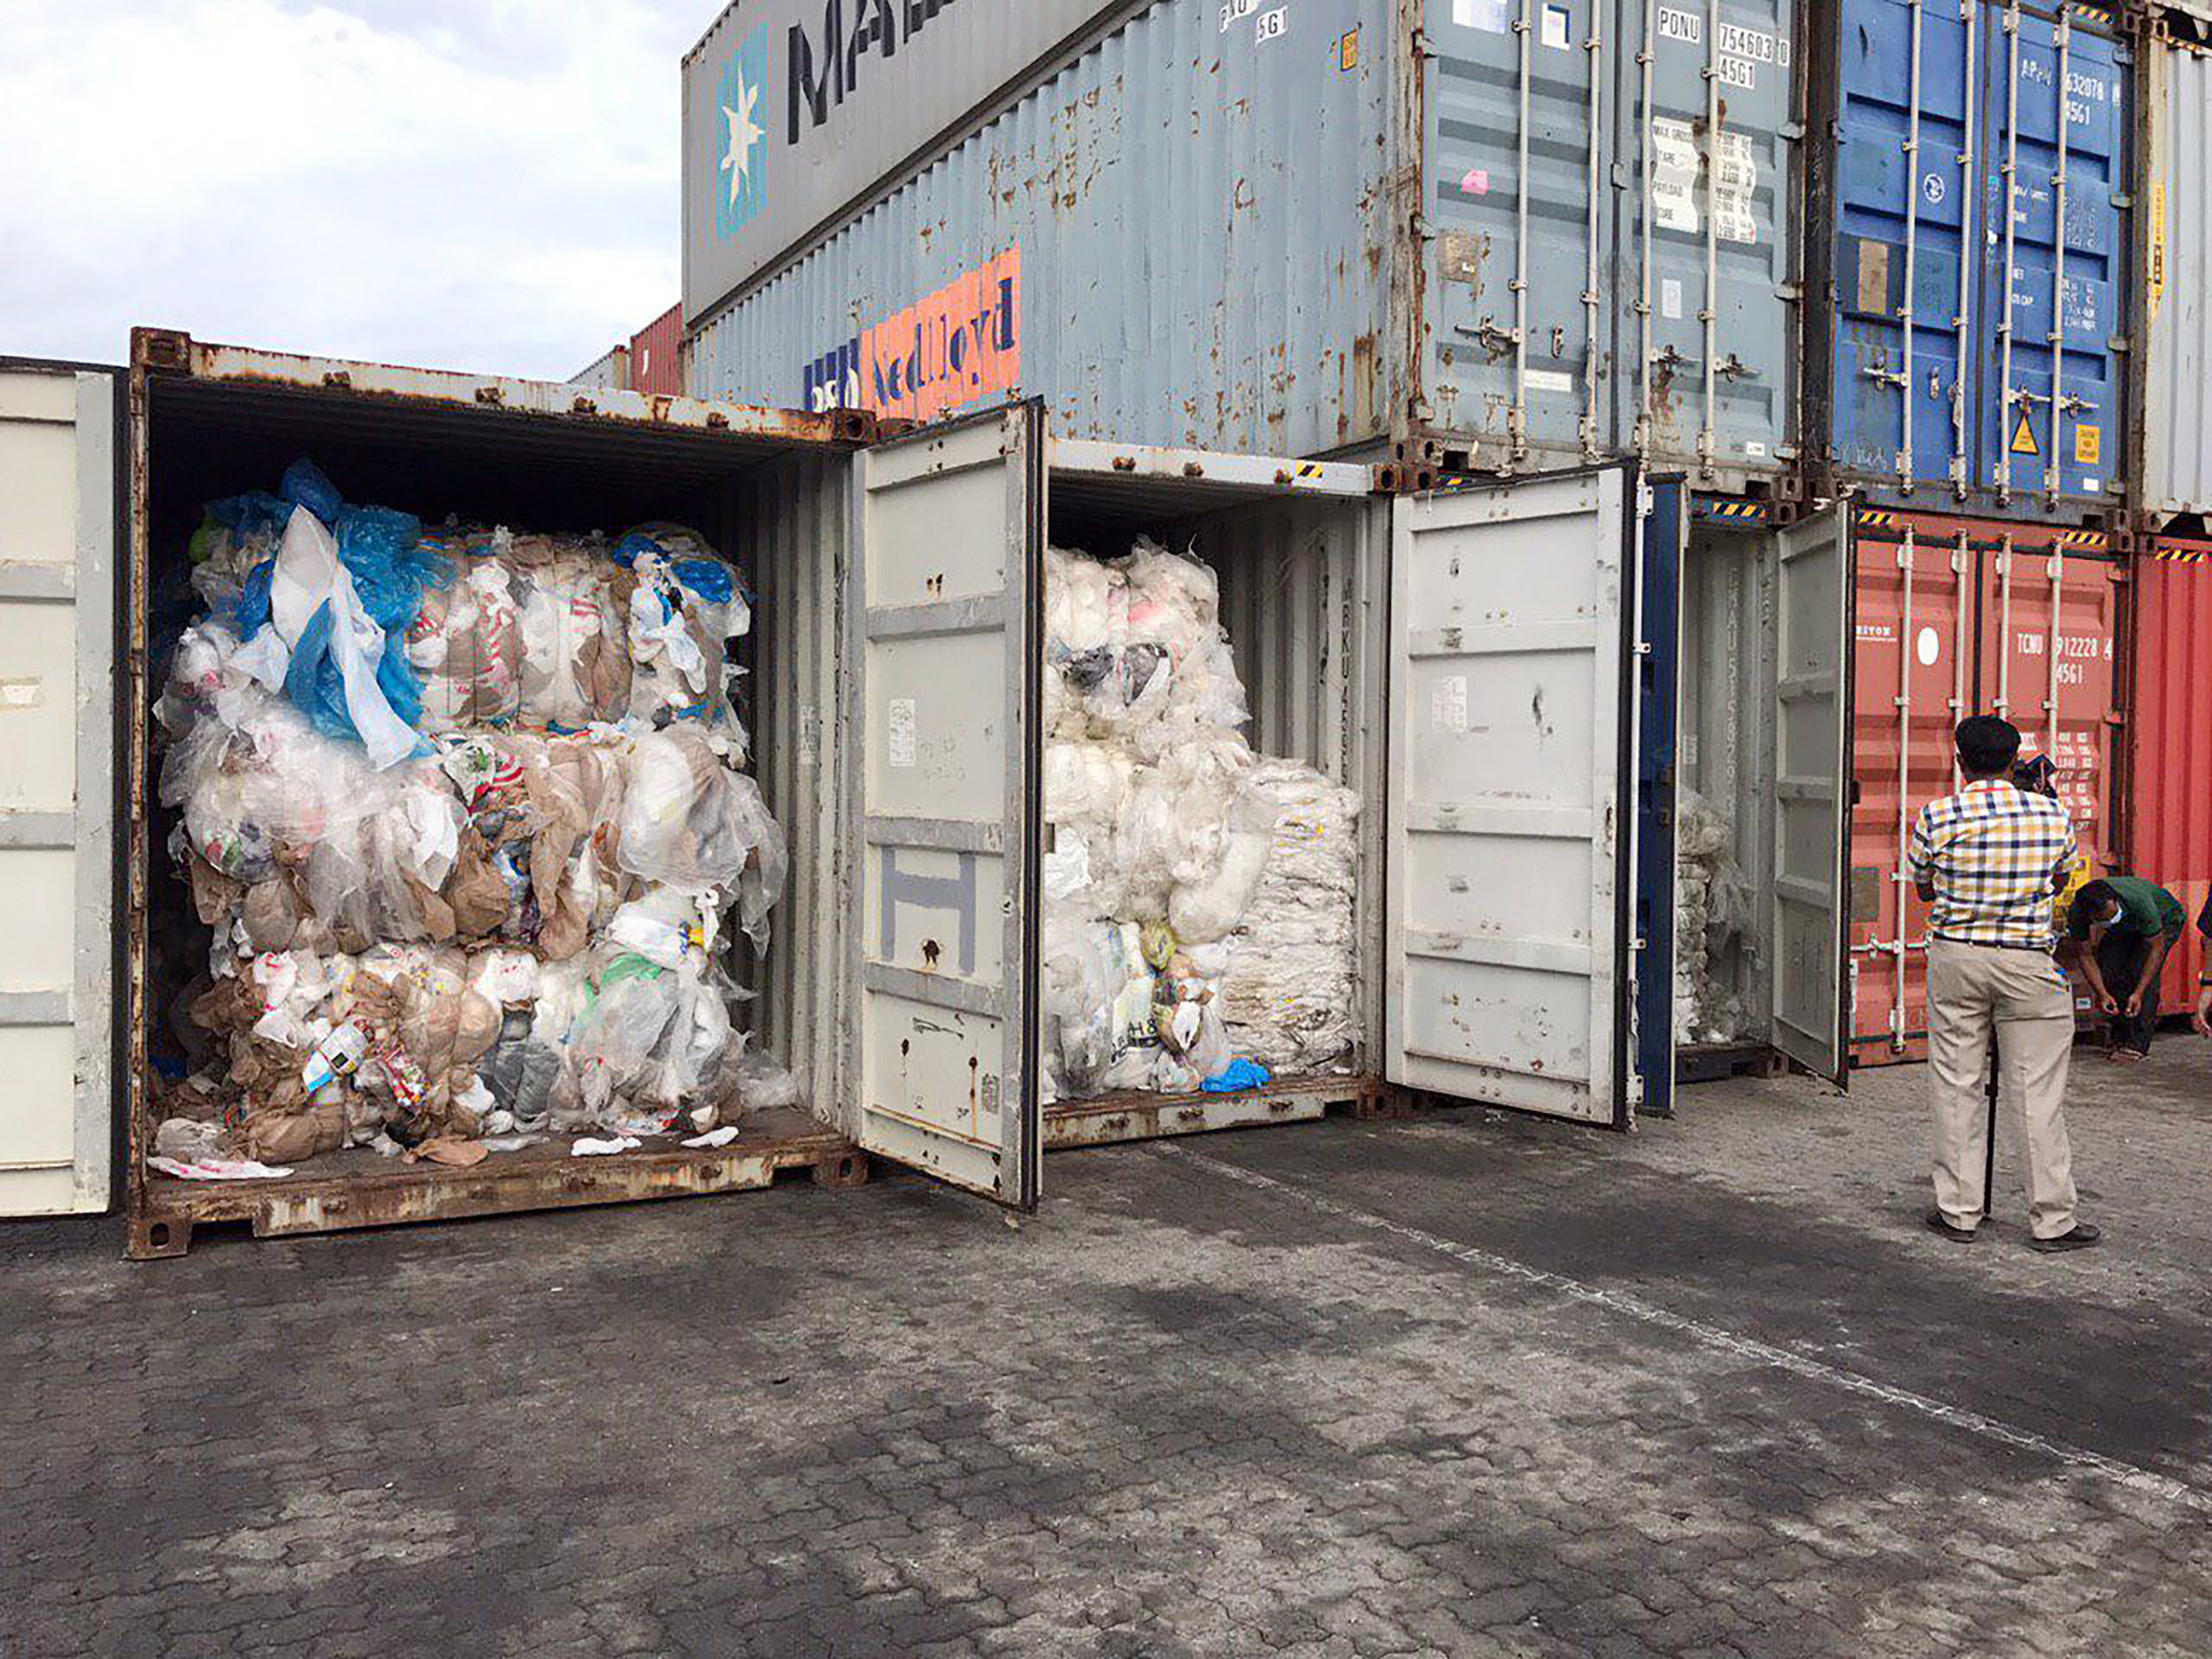 Containers loaded with plastic waste are placed at country beach city, Sihanoukville Port, southwest of Phnom Penh, Cambodia on July 16, 2019. (Sea Seakleng&mdash;AP)